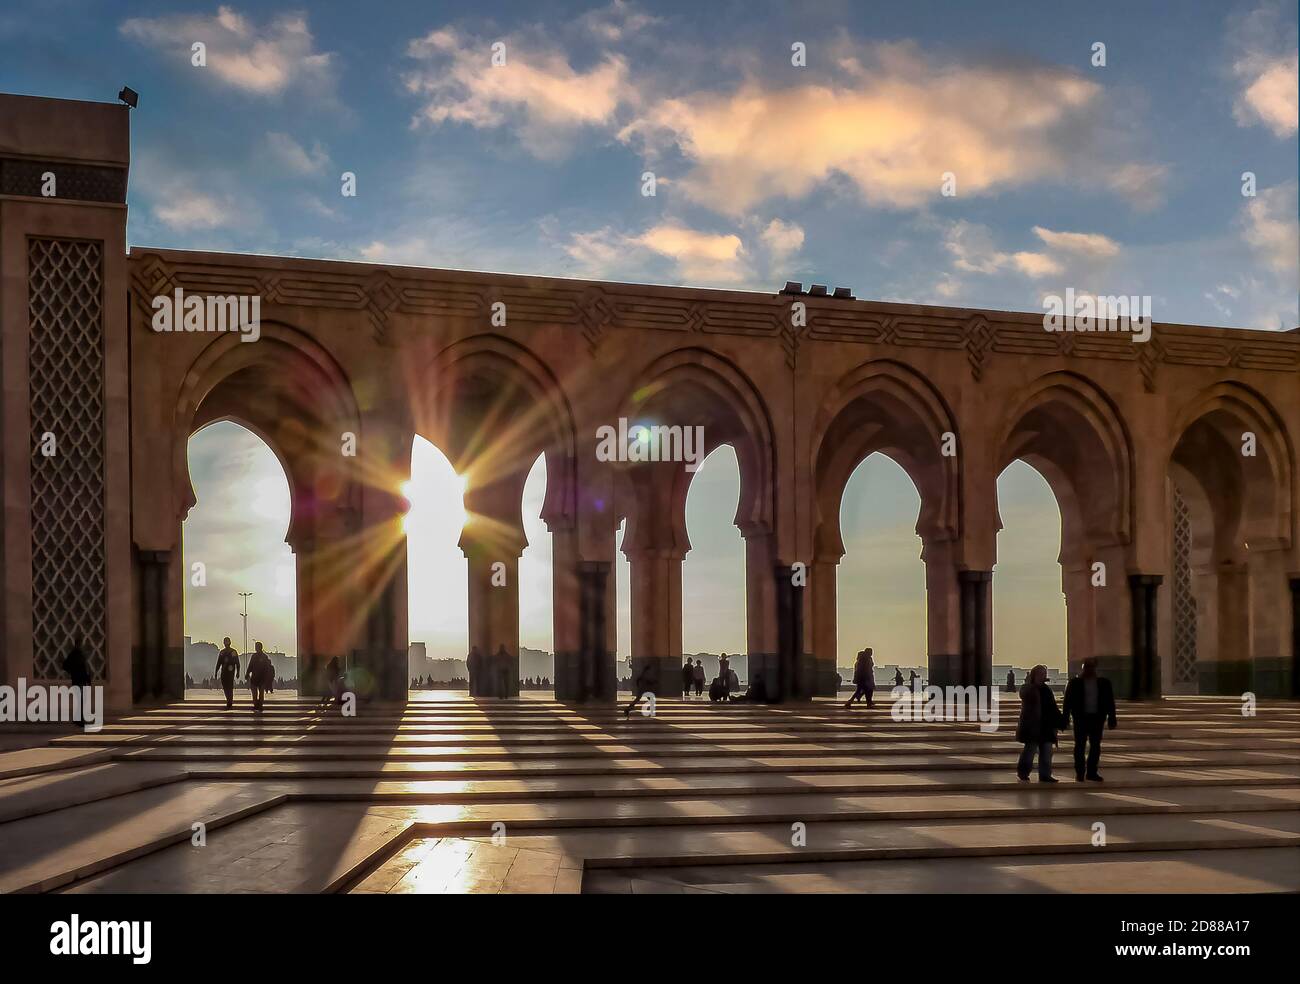 Casablanca, Morocco - December 09, 2012: Sunset at the third largest mosque in the world, Mosque Hassan II Stock Photo